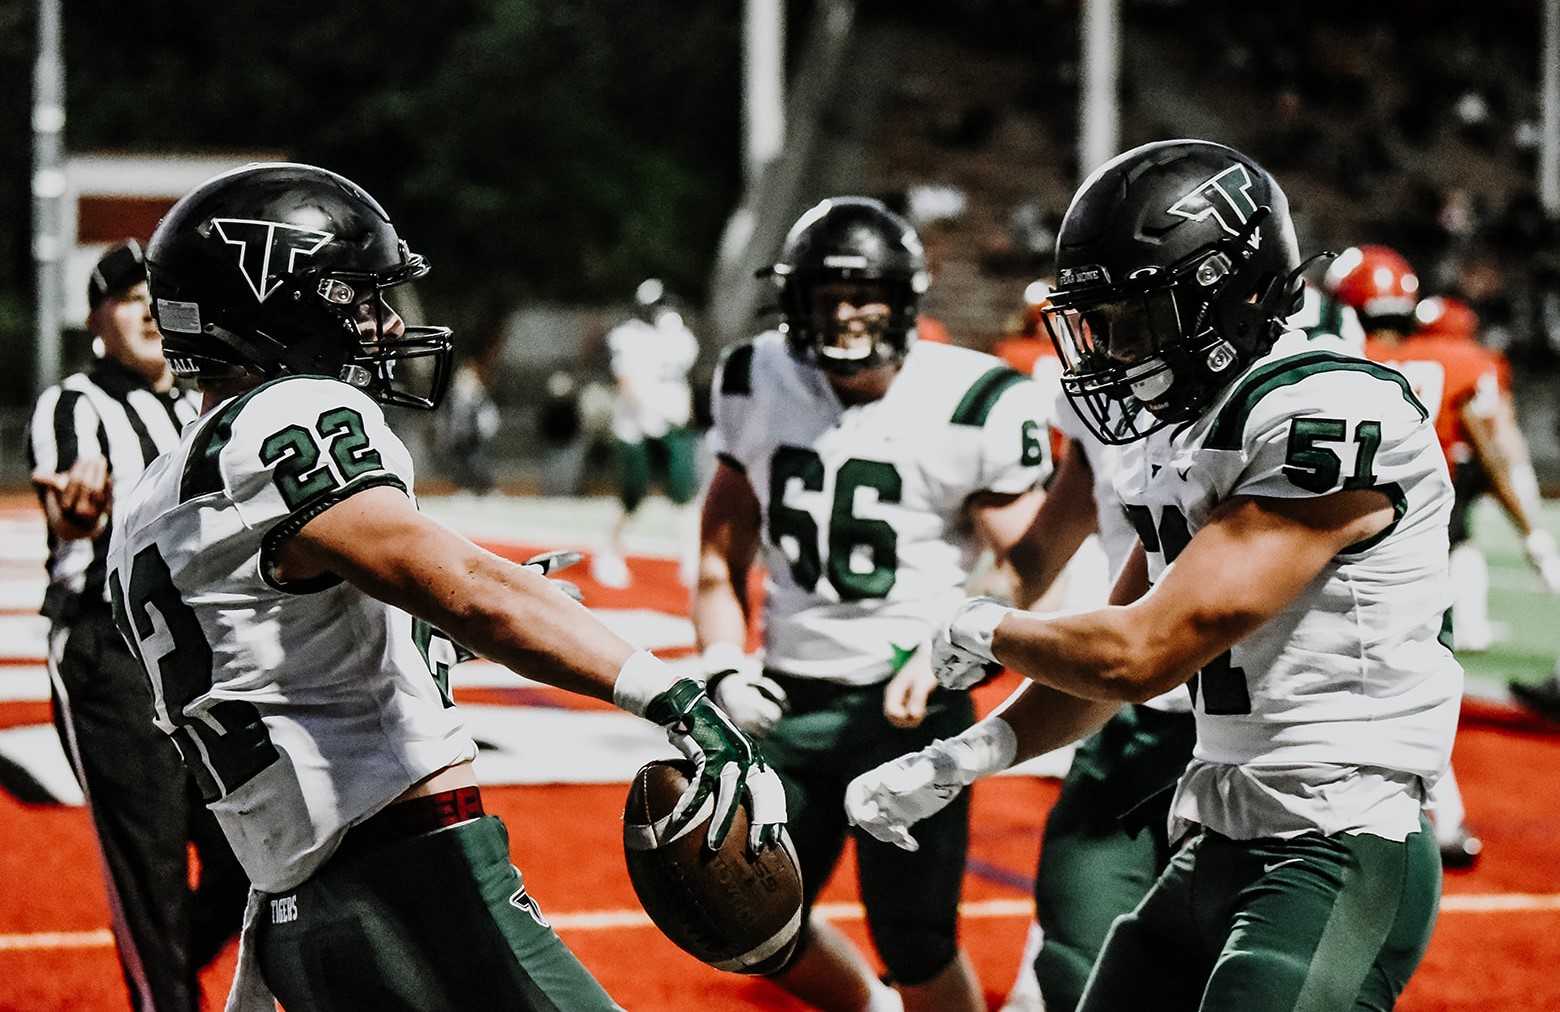 Tigard's Konner Grant (22), celebrating with Boone Koffman (51), rushed for 200 yards Thursday. (Photo by Fanta Mithmeuangneua)